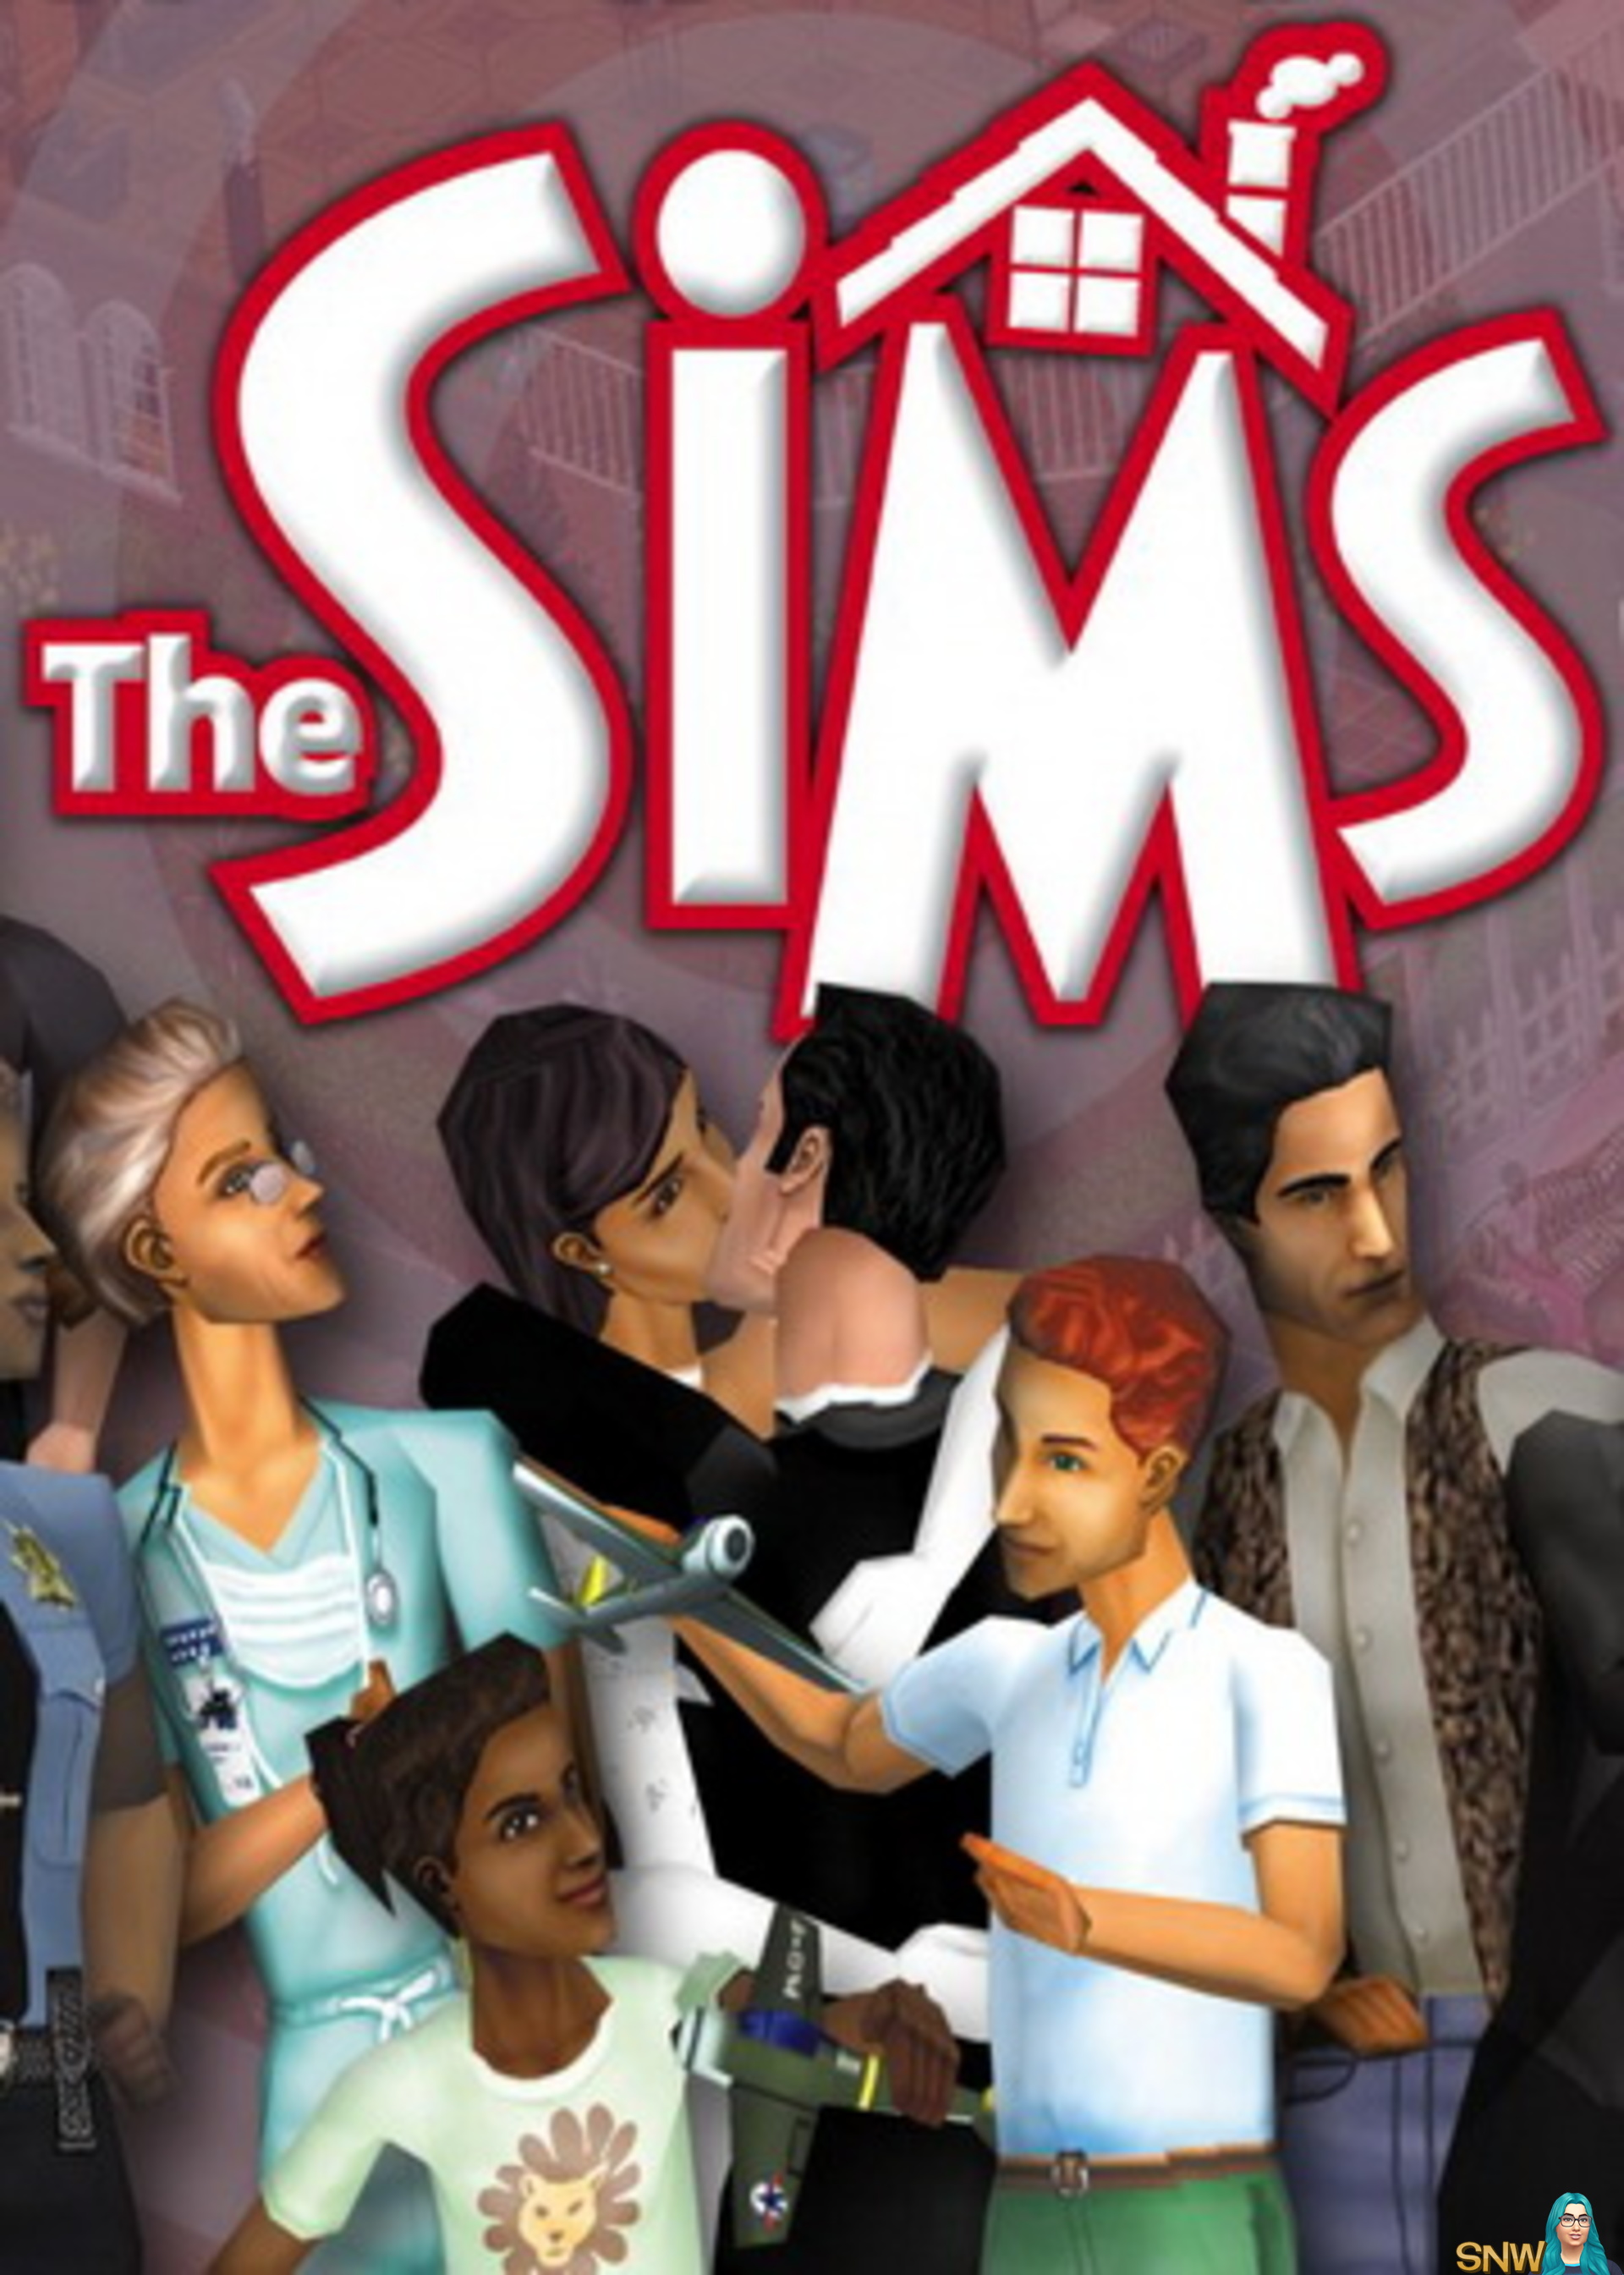 Игра sims части. The SIMS 1 обложка. SIMS 1 Постер. The SIMS 2000 обложка. The SIMS 1999.